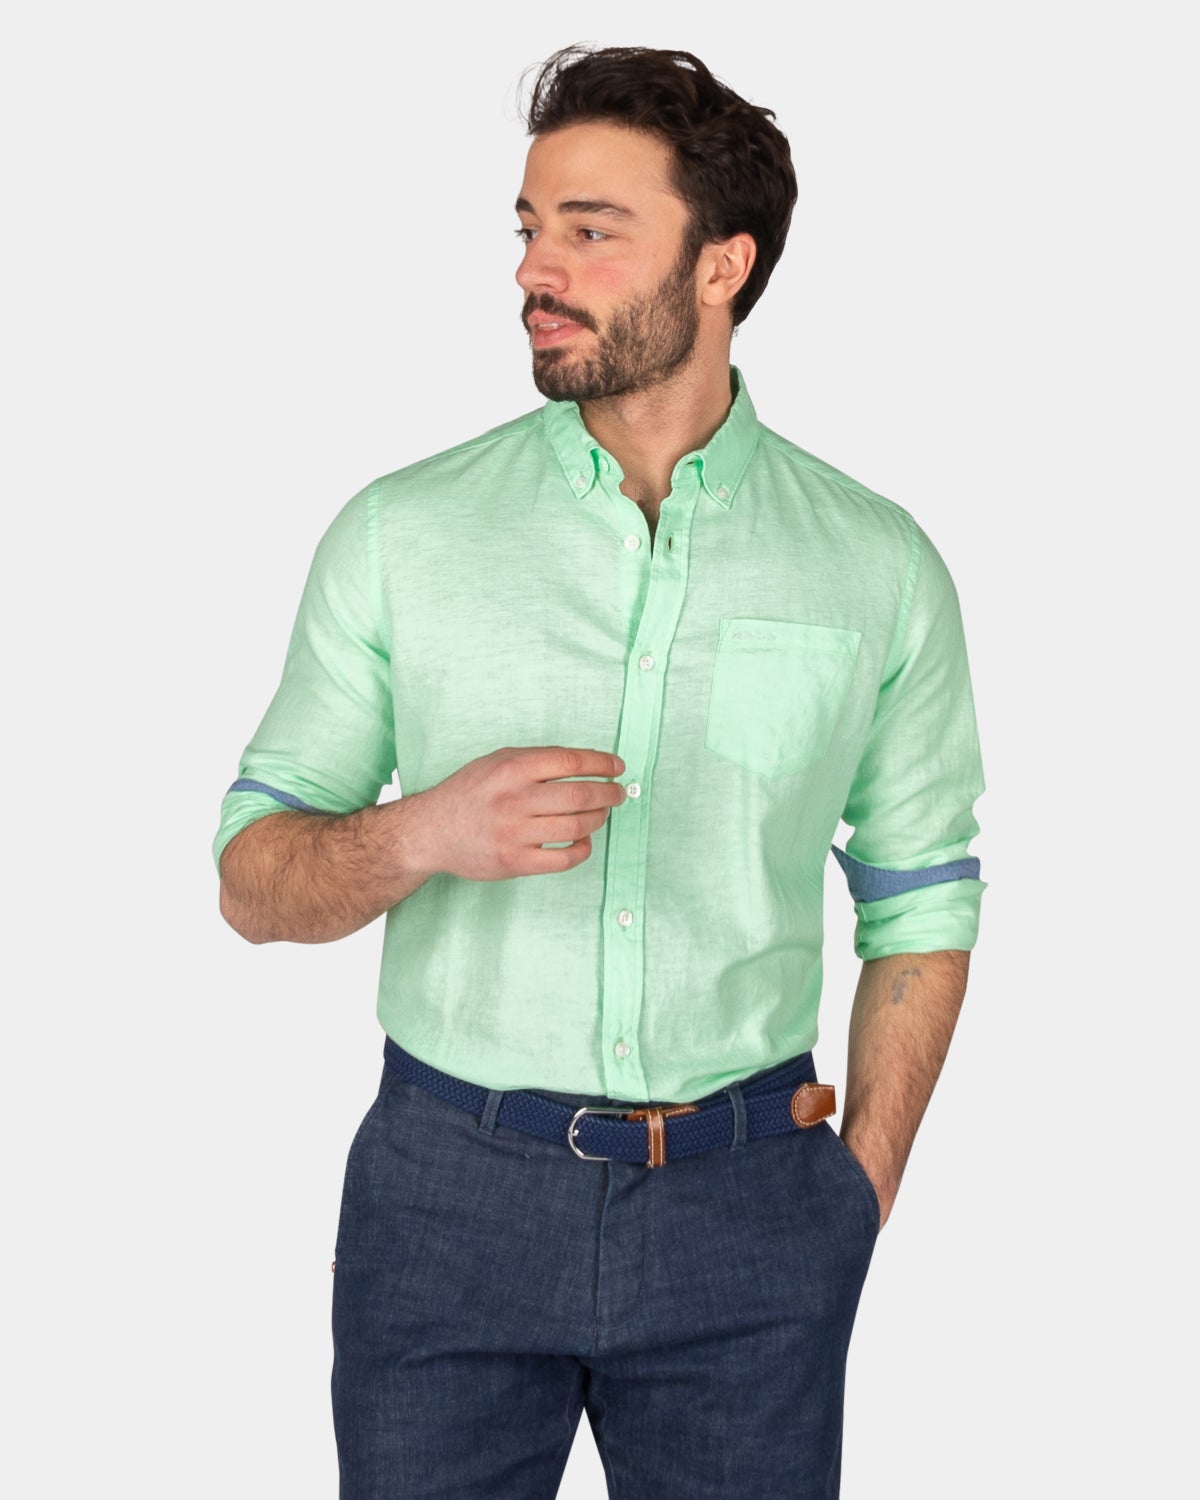 Plain linen shirt in many colors - Teal Green